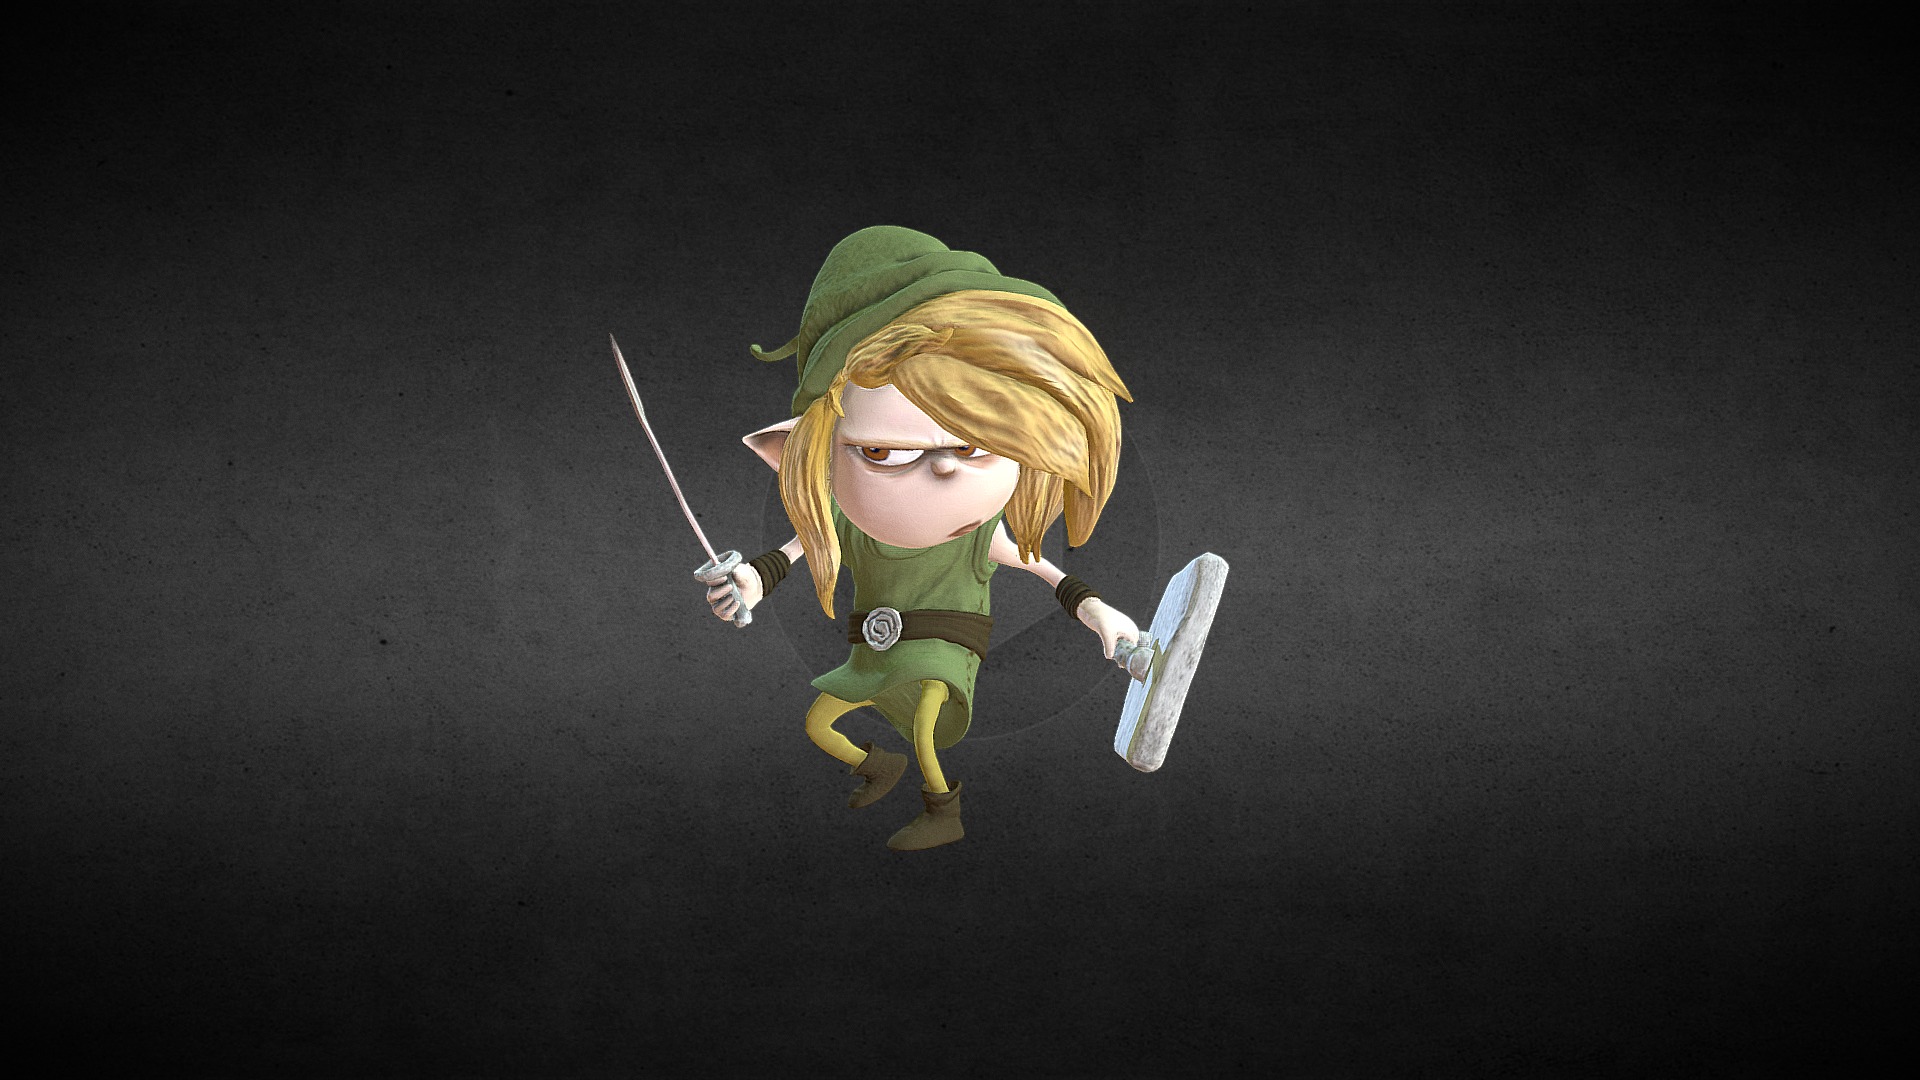 3D model Link – The Legend of Zelda - This is a 3D model of the Link - The Legend of Zelda. The 3D model is about a toy figurine holding a sword.